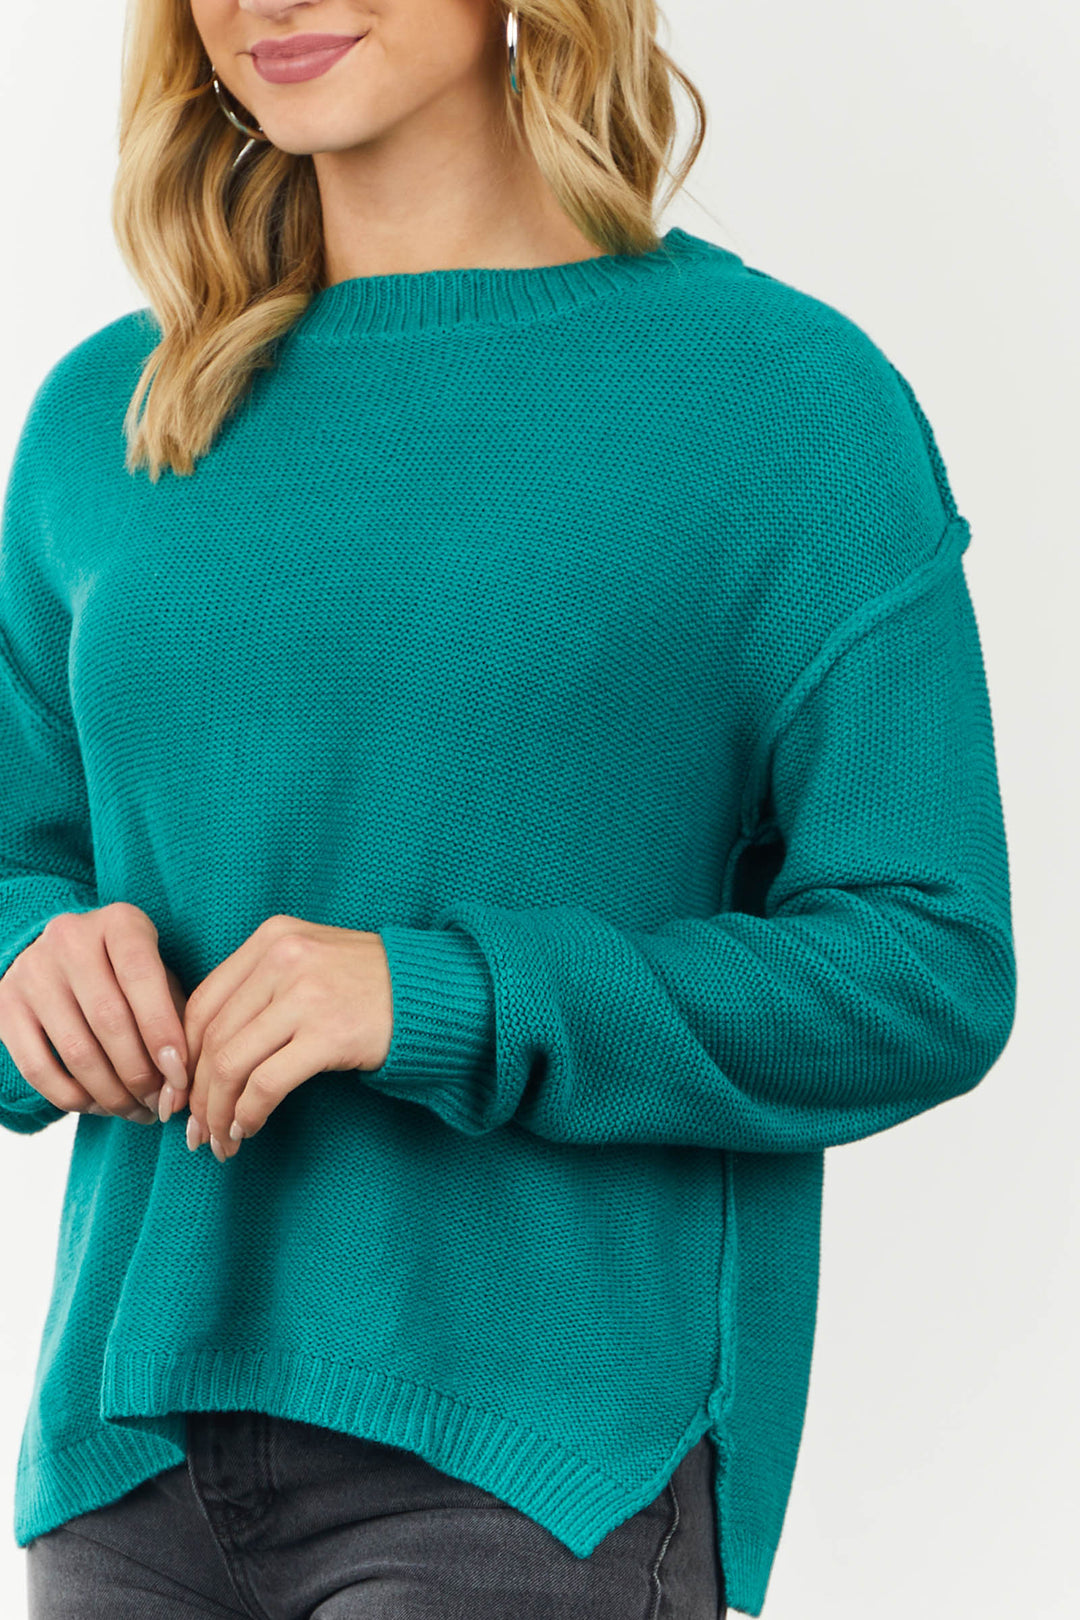 Teal Exposed Seam Side Slit Sweater & Lime Lush